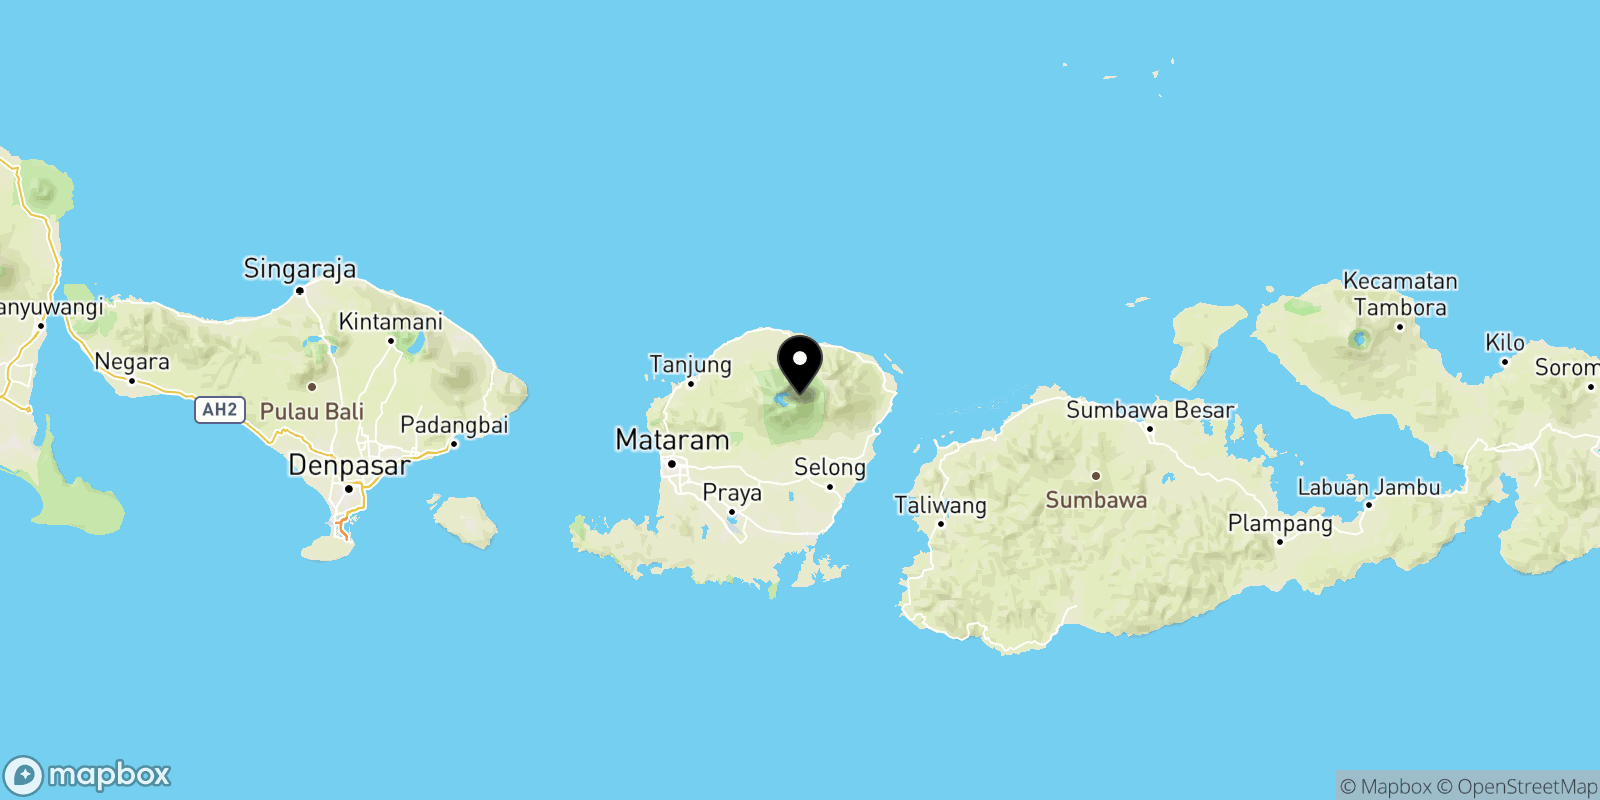 A map of part of Indonesia, including Bali and Lombok. Mount Rinjani is pinned.